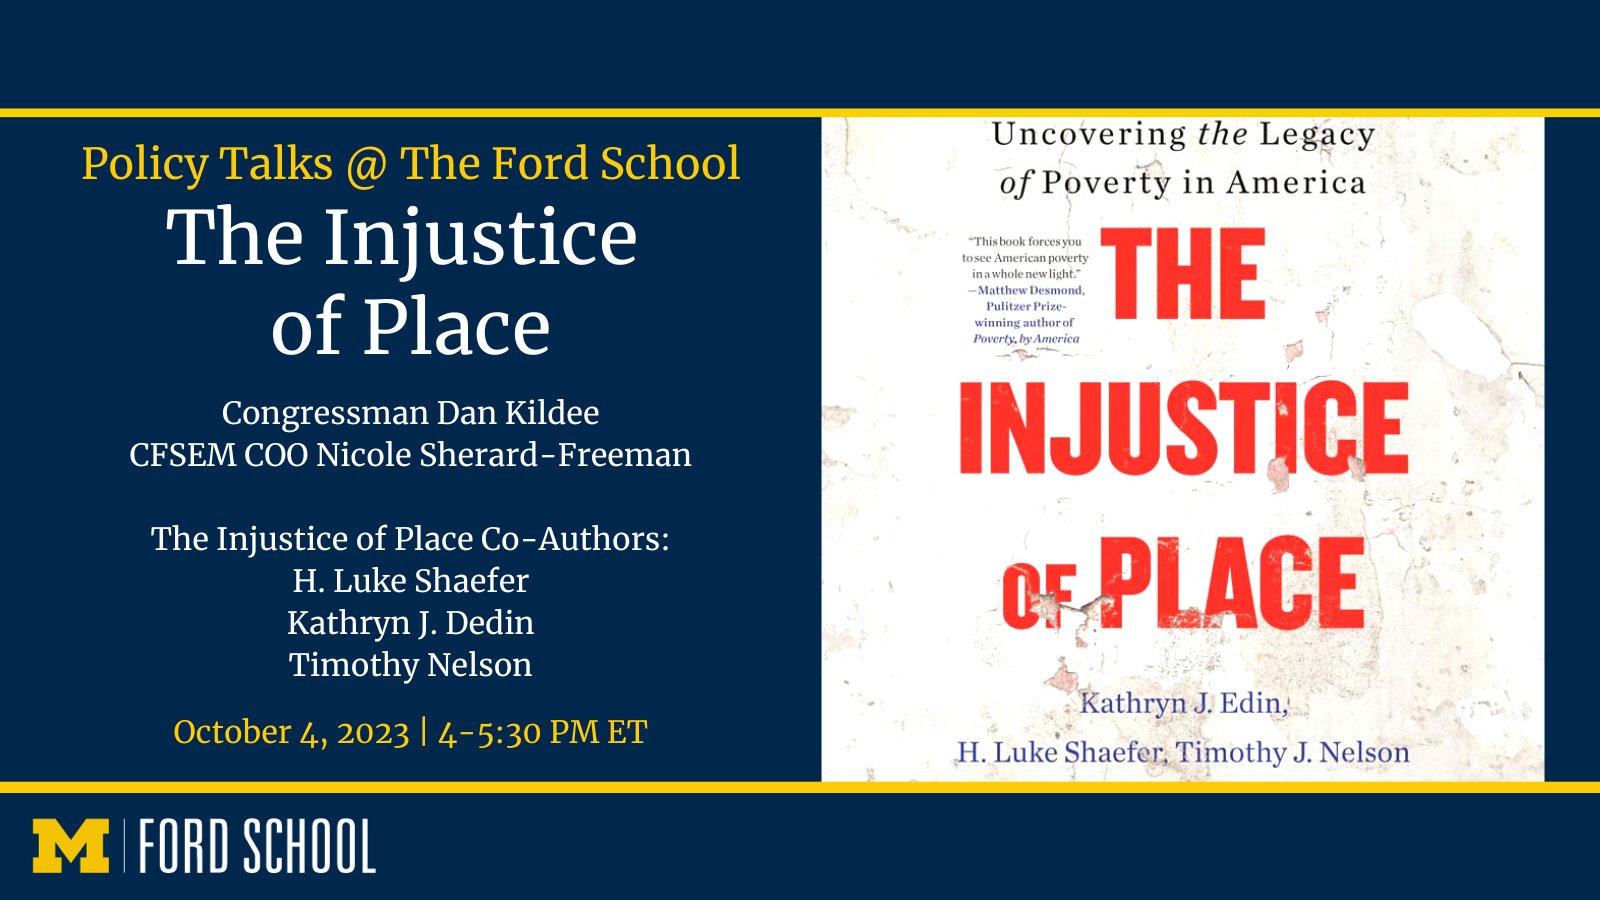 The Injustice of Place: Uncovering by Edin, Kathryn J.